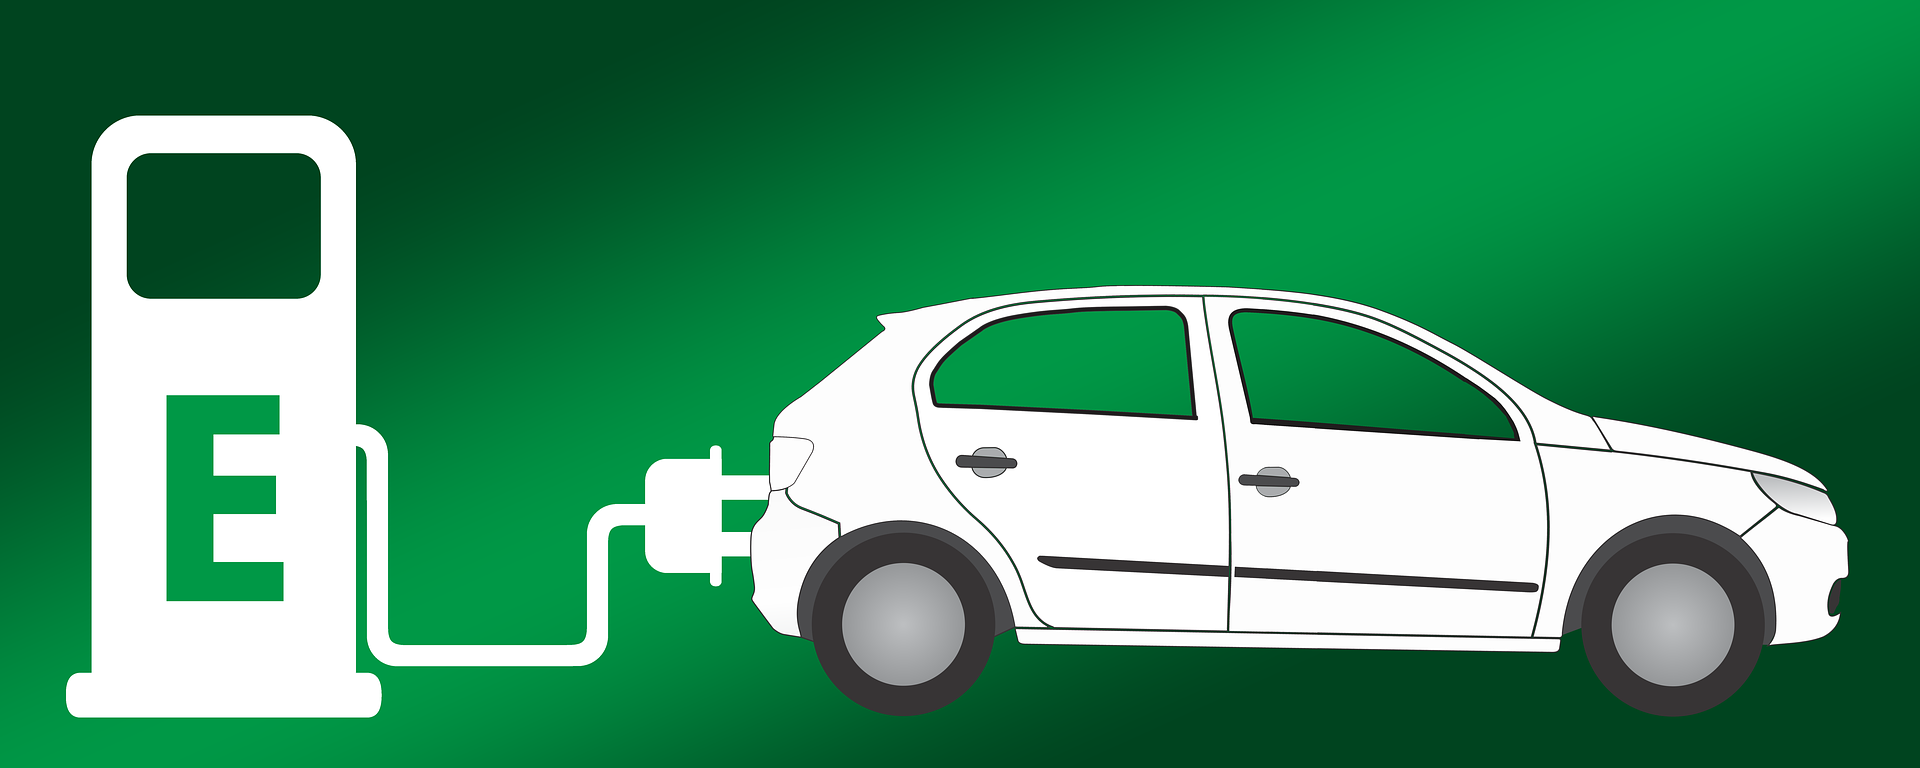 electric-car-2728131_1920.png